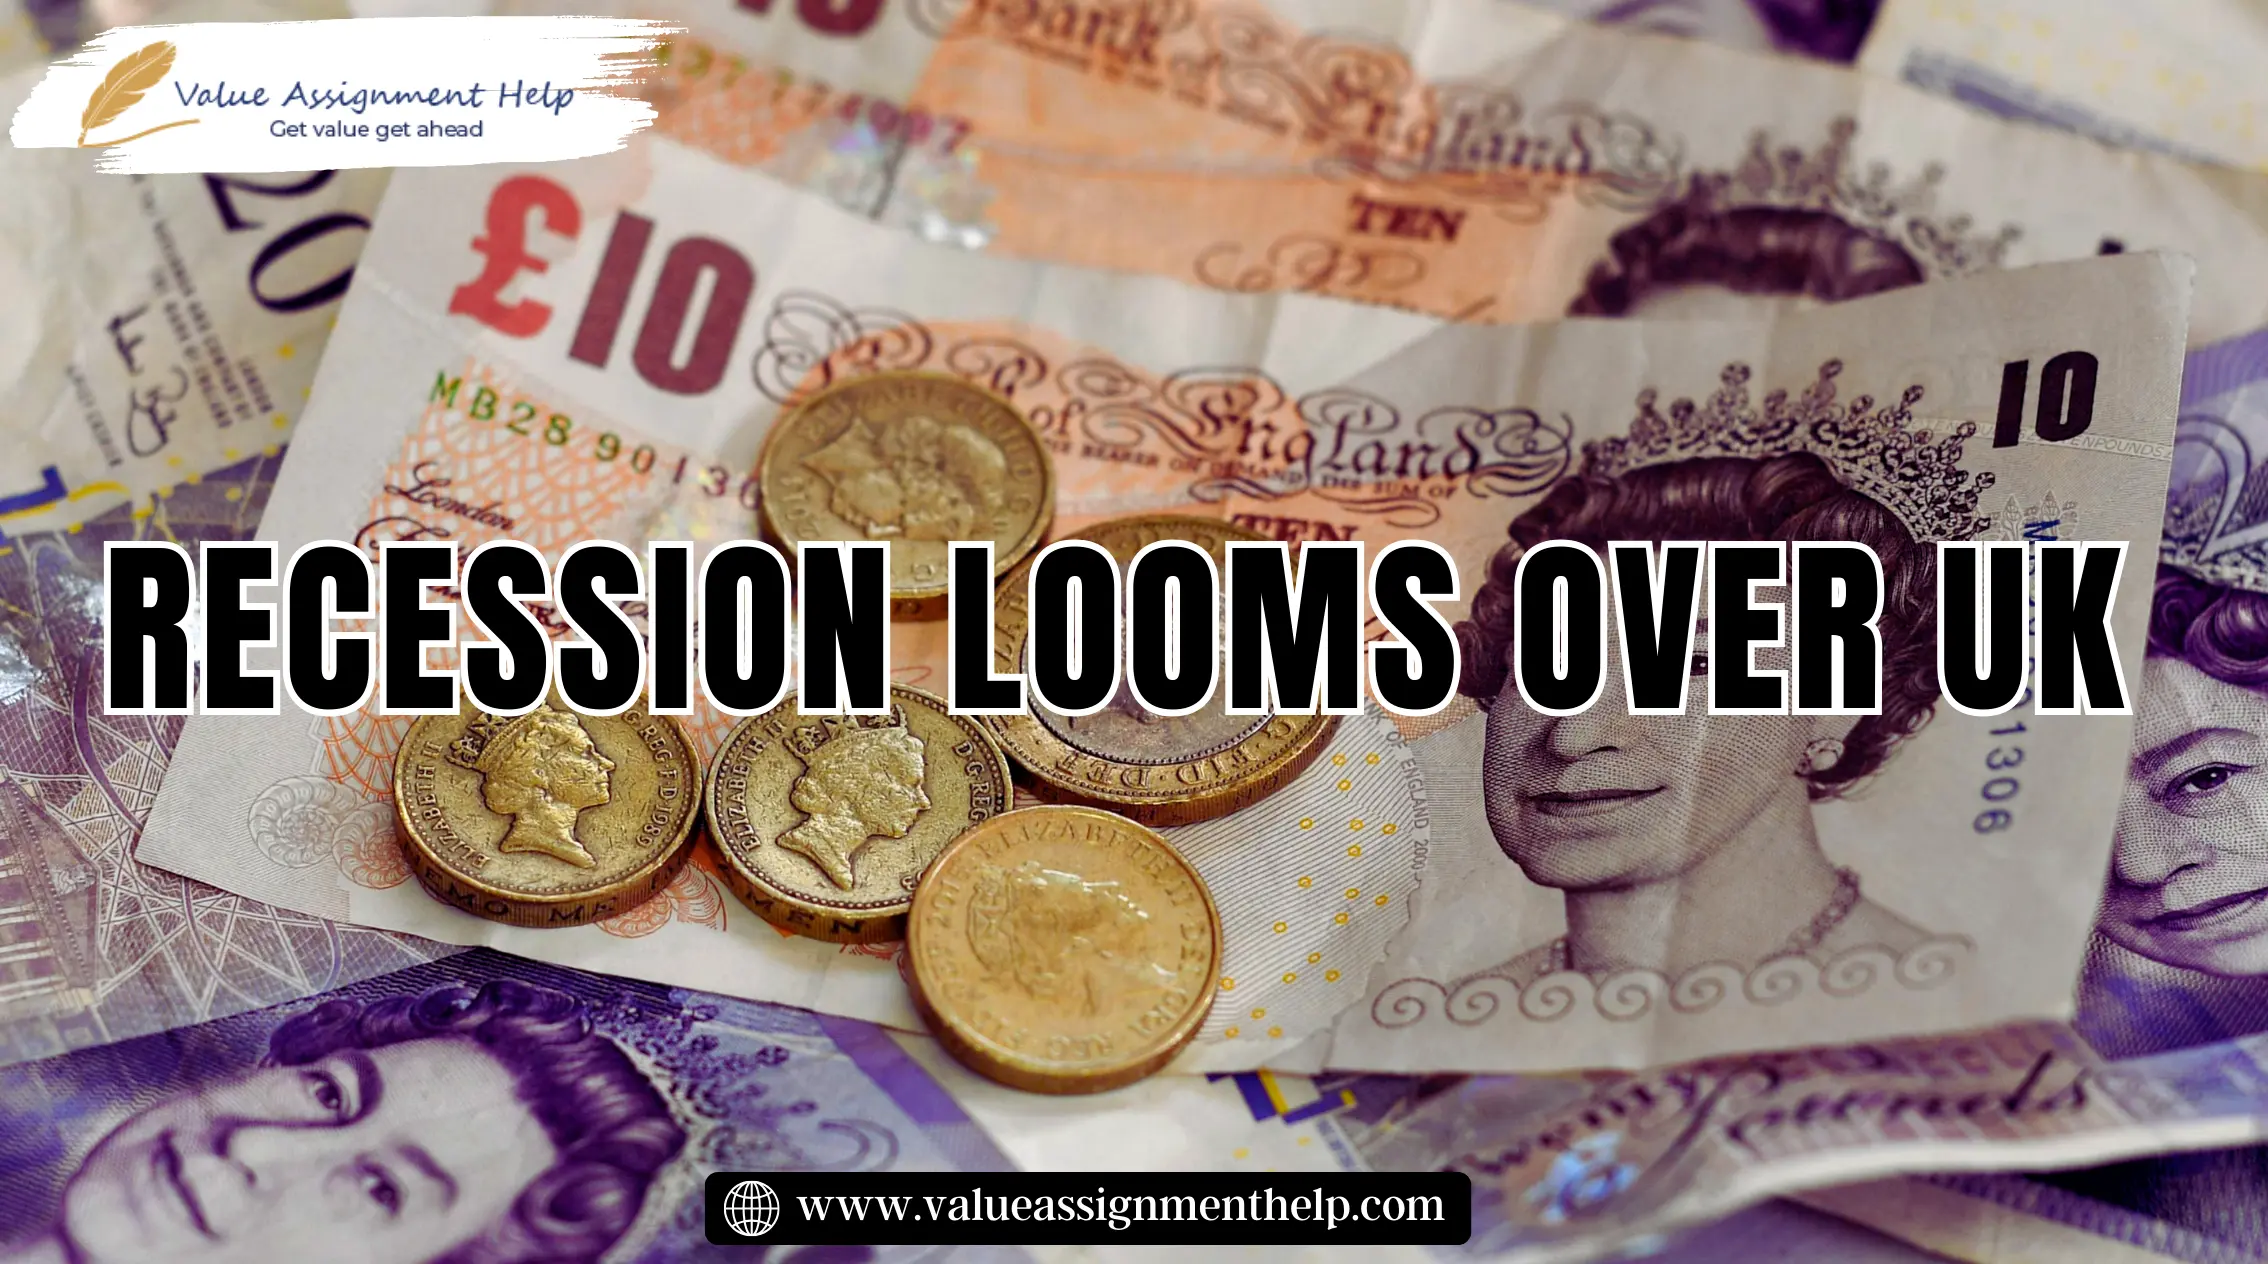  Recession looms over UK